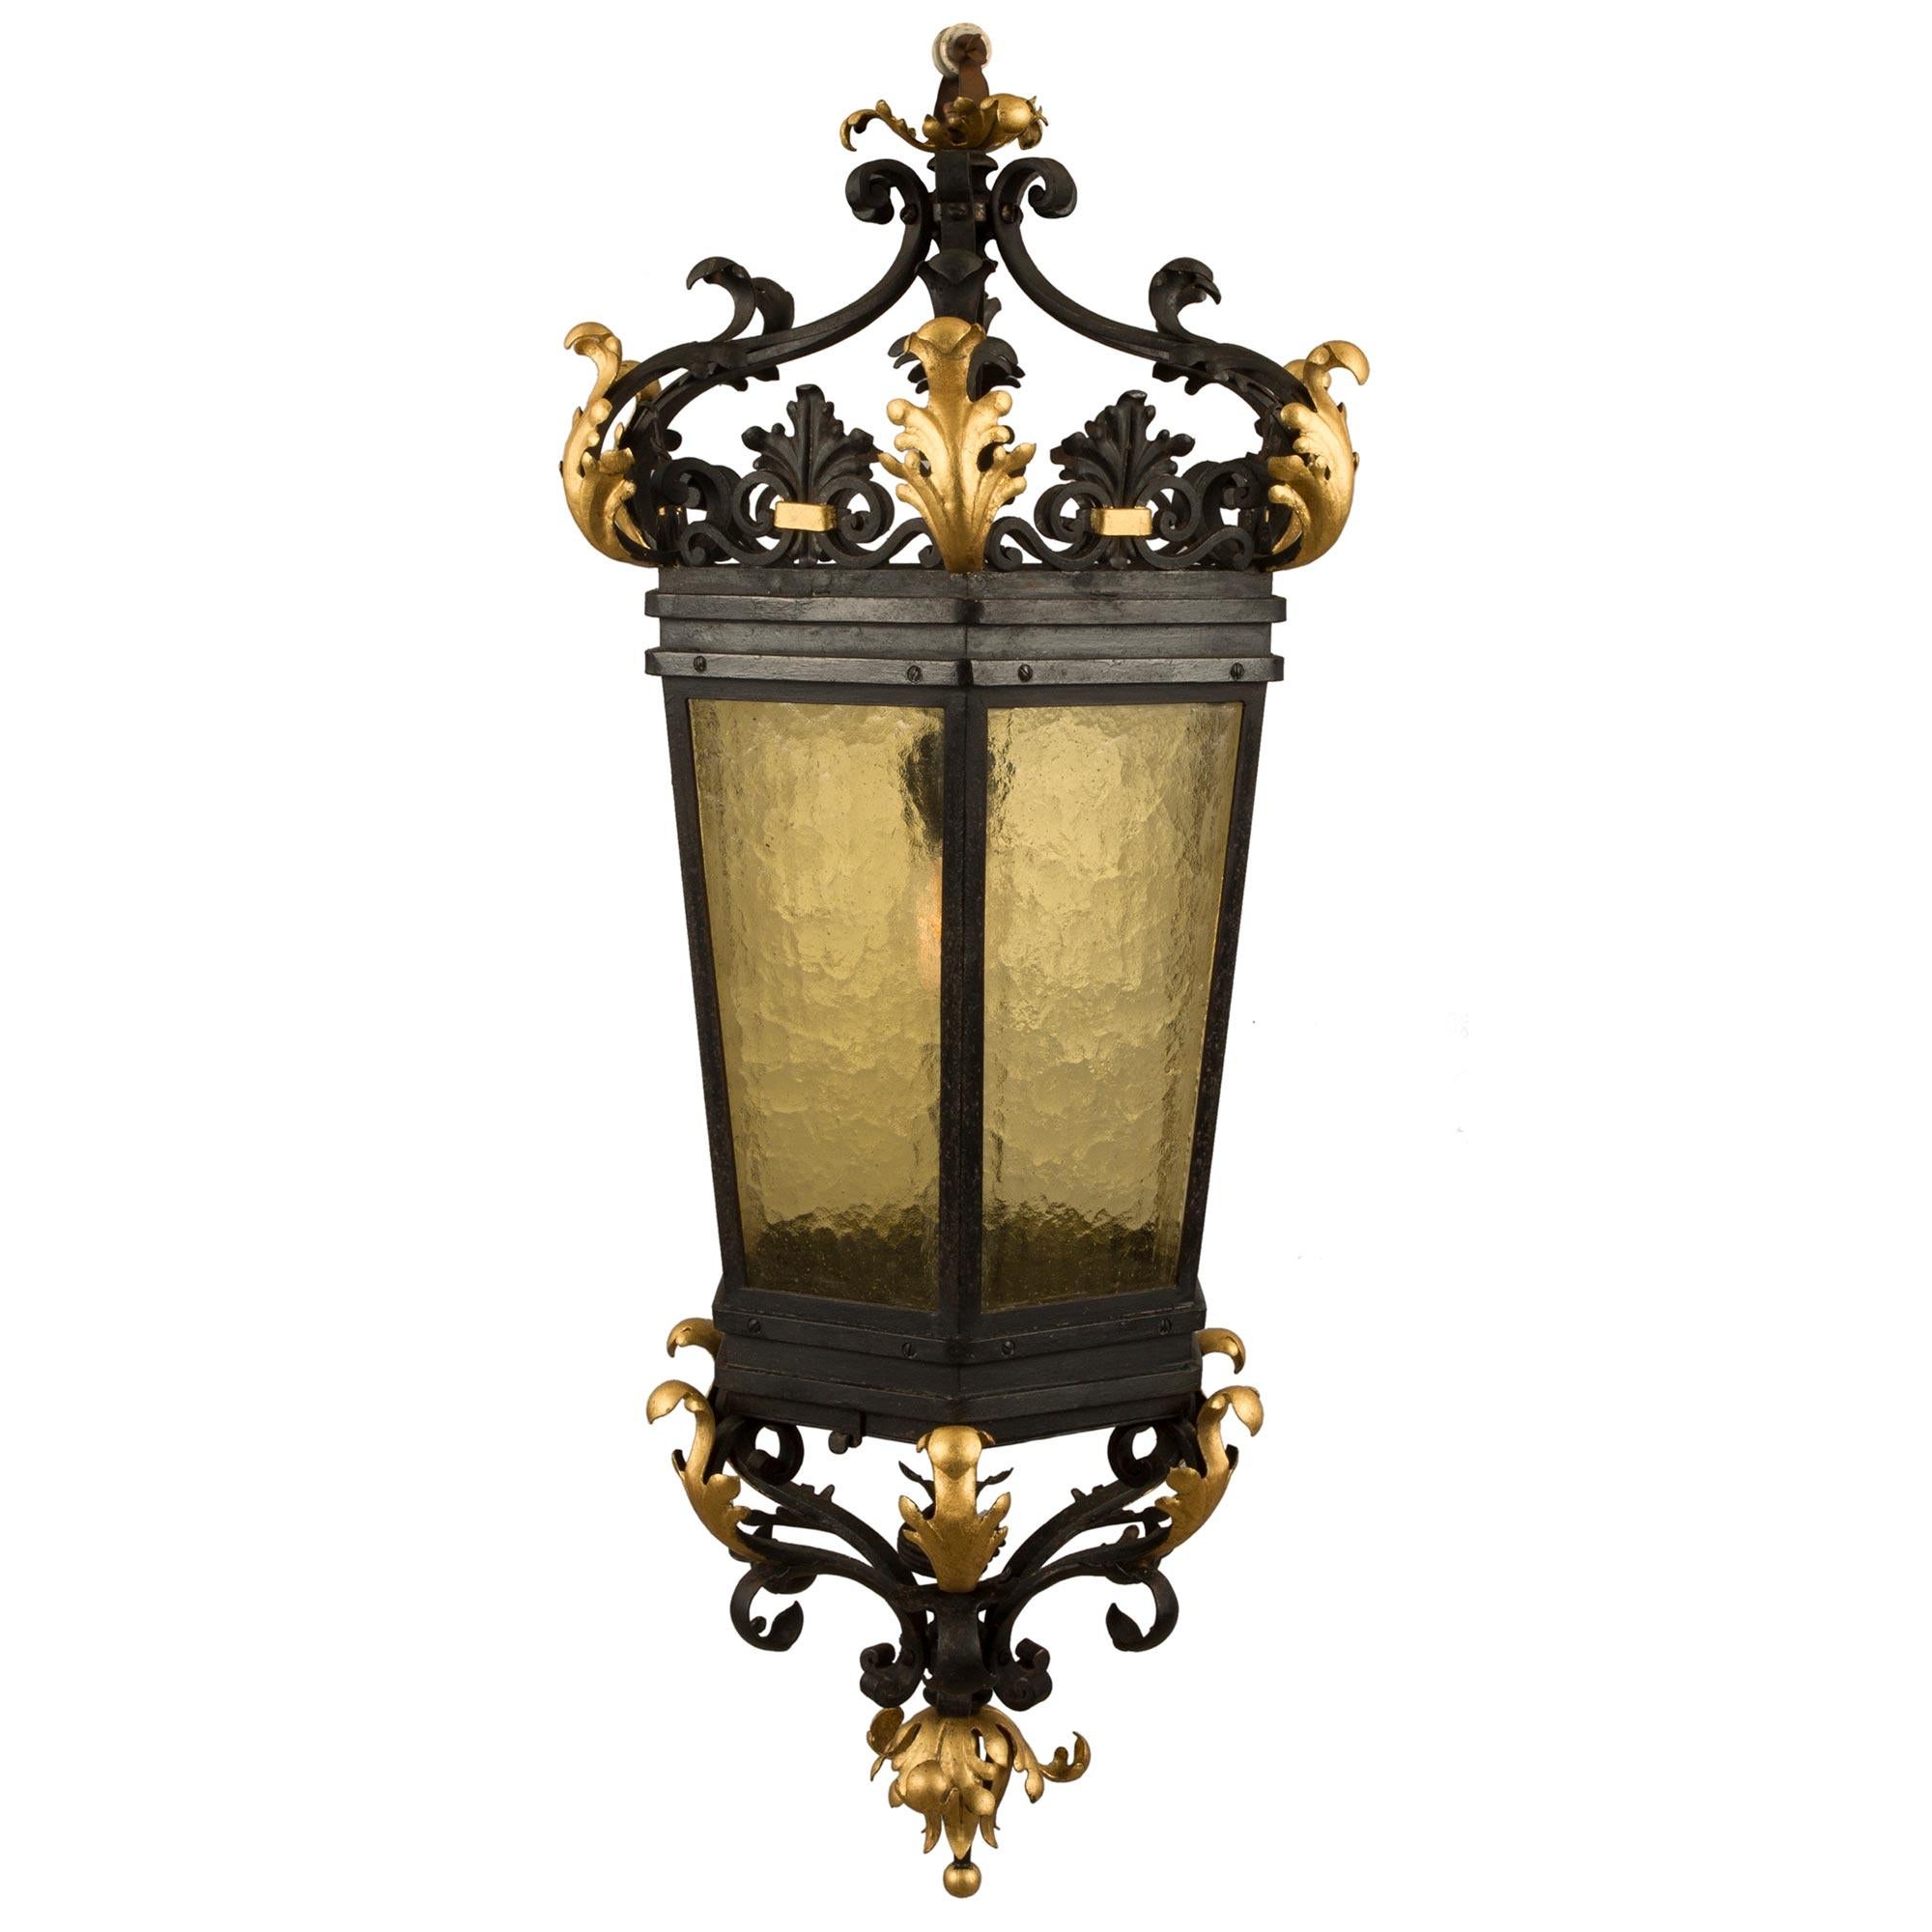 A beautiful Italian 19th century Renaissance st. iron, gilt iron and glass hexagonal lantern. The lantern is centered by most decorative and charming scrolled movements with lovely gilt metal accent leaves. The tapered hexagonal body retains its